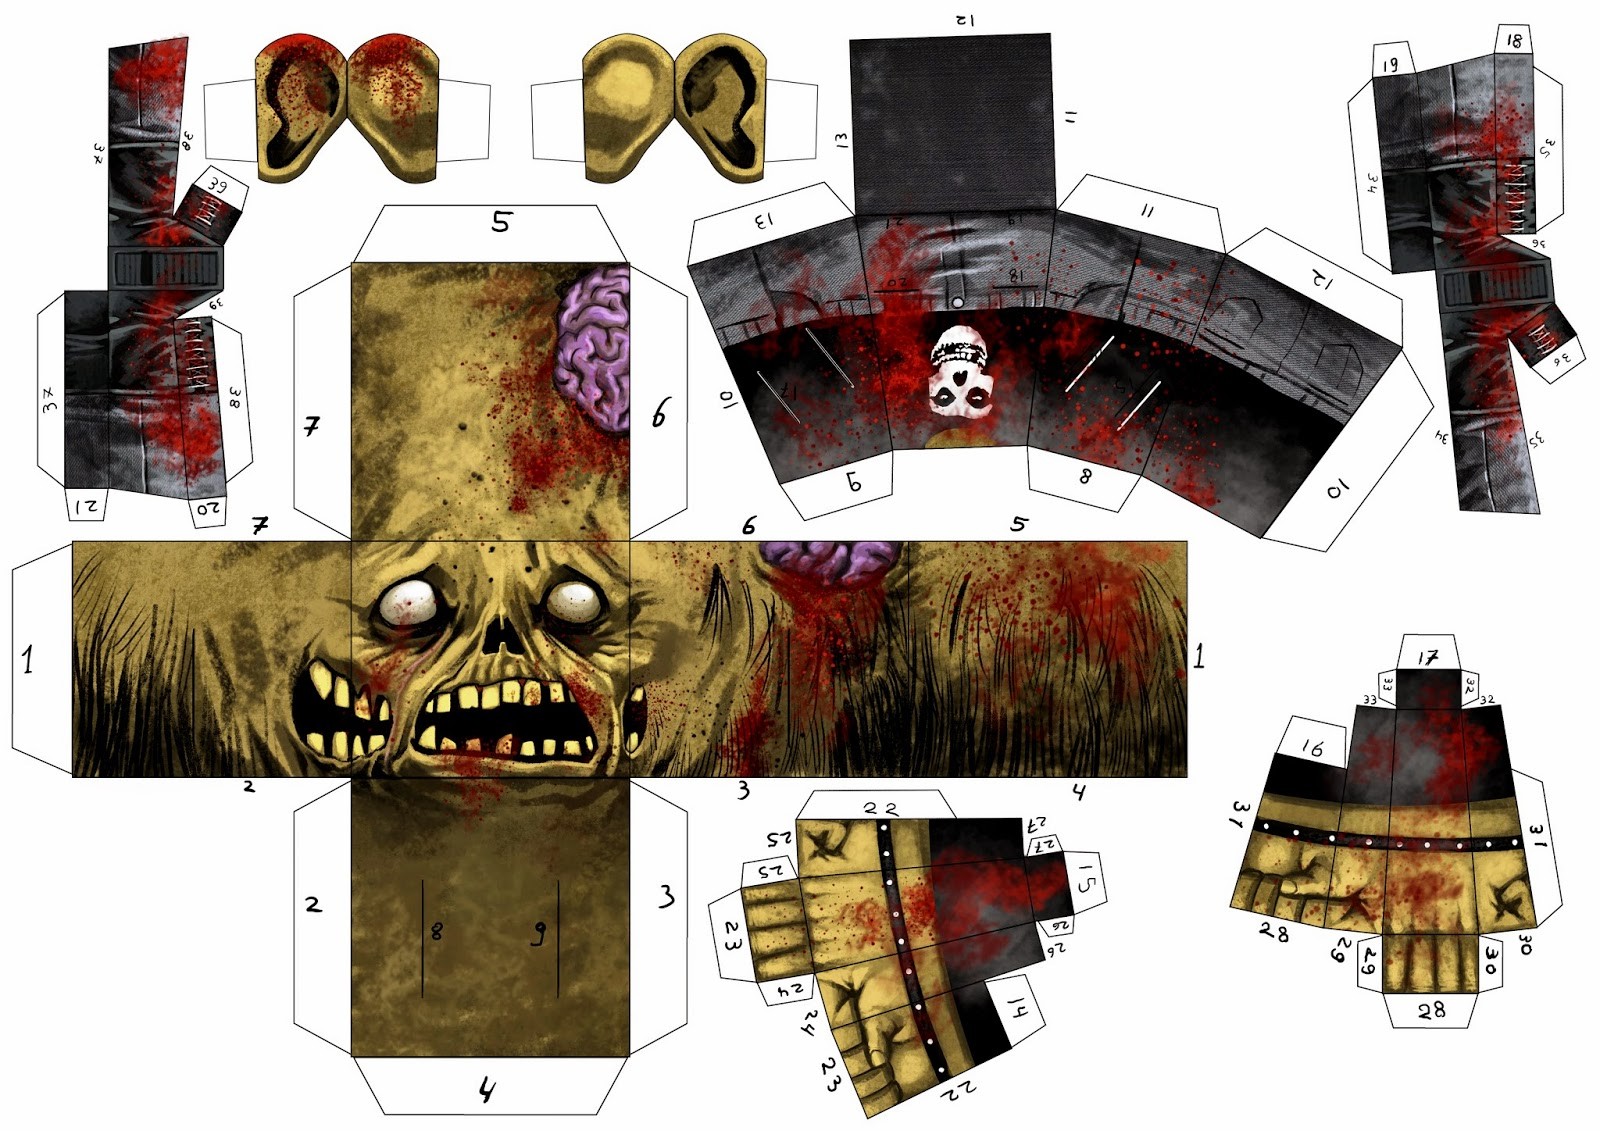 Counter Craft 3 Zombies download the new version for iphone